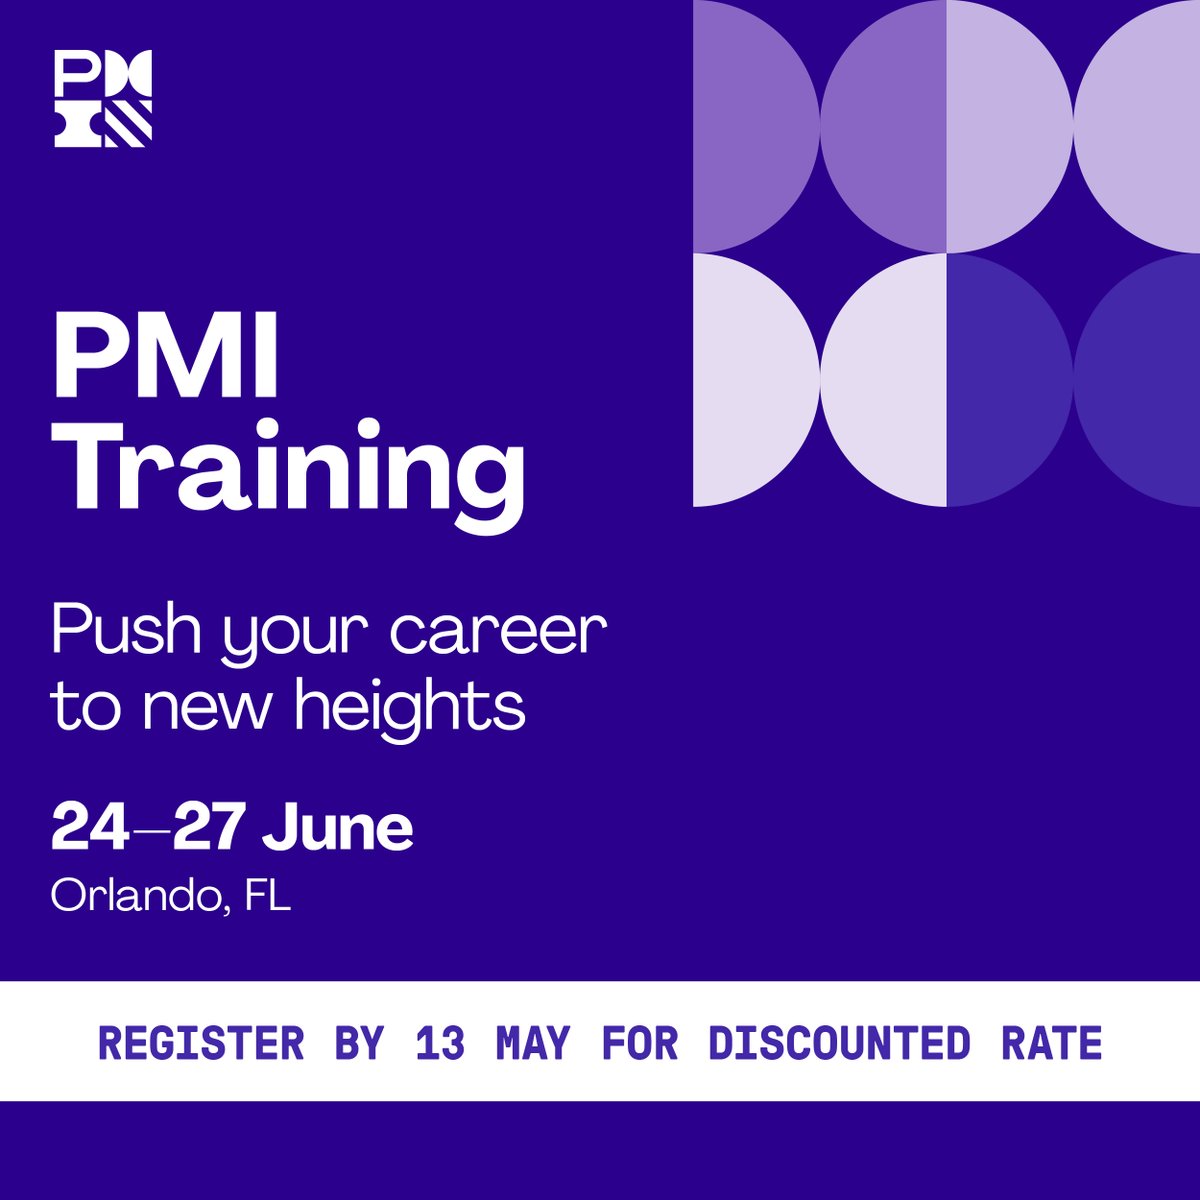 Ready to level up your career? Join #PMITraining in sunny Orlando, FL for 4 days of intensive learning and nights unwinding at Disney Contemporary Resorts. Register by 13 May to take advantage of discounted rates! bit.ly/4bdi4ih